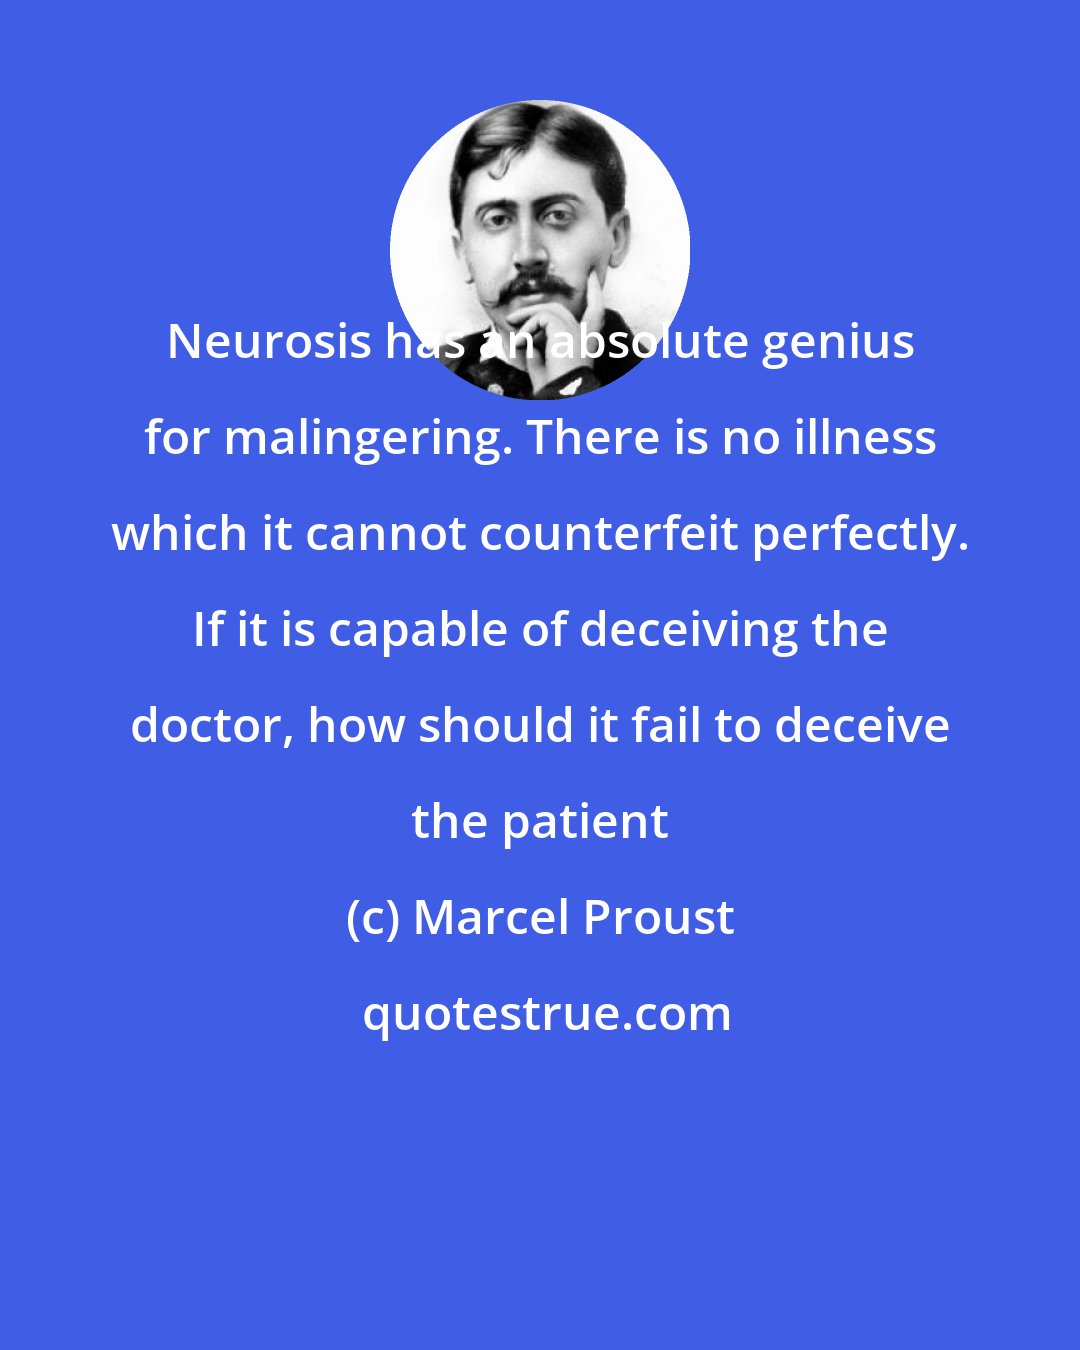 Marcel Proust: Neurosis has an absolute genius for malingering. There is no illness which it cannot counterfeit perfectly. If it is capable of deceiving the doctor, how should it fail to deceive the patient